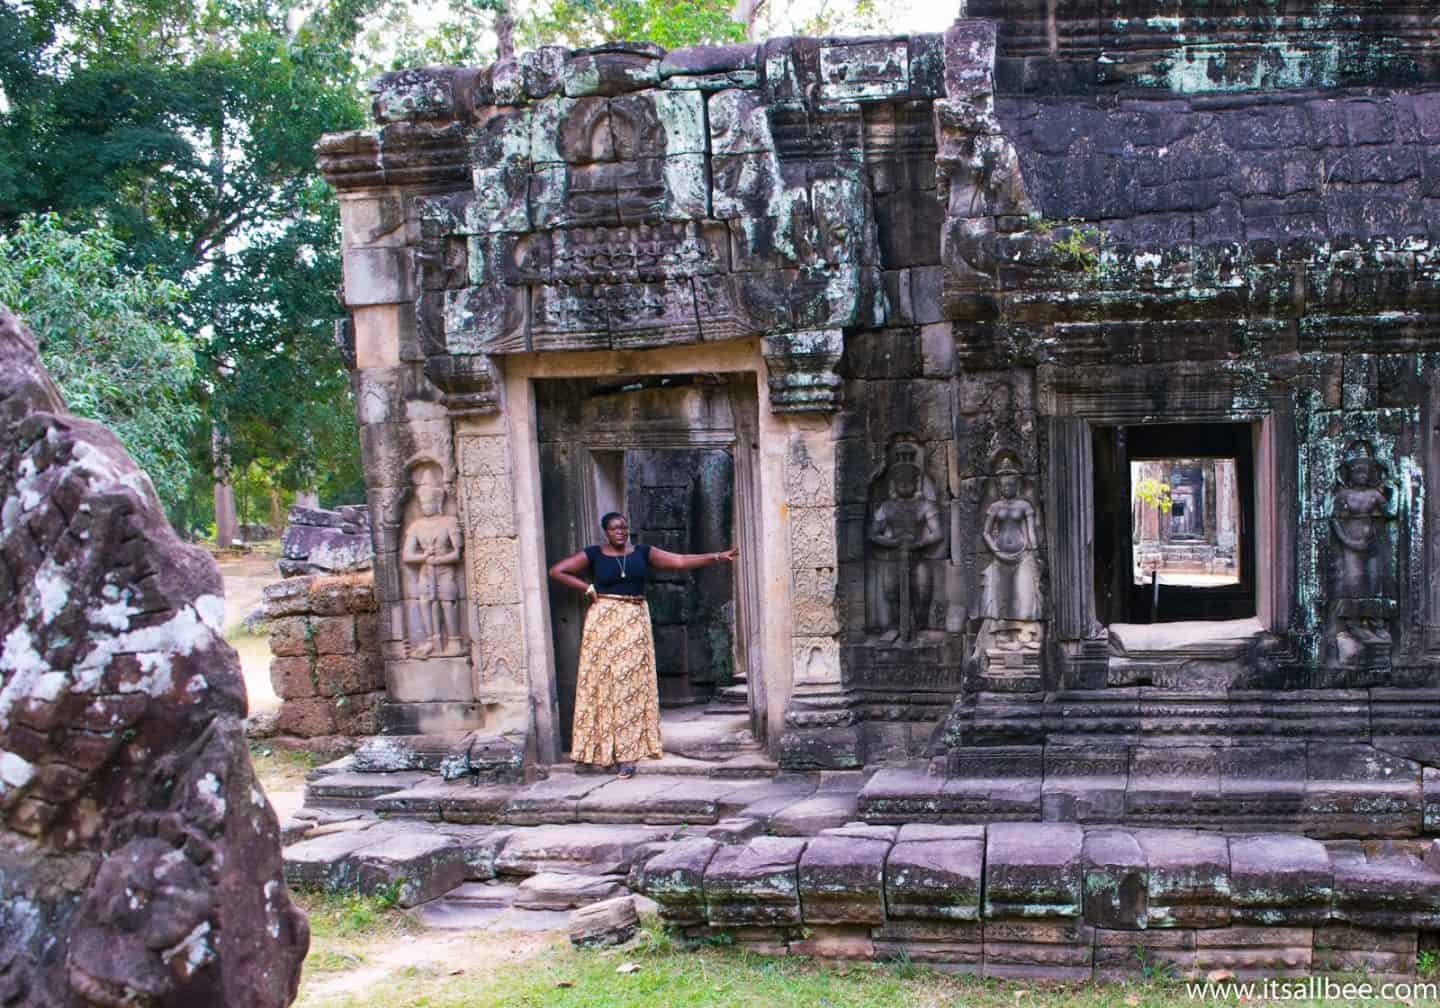  What to wear in cambodia - packing lists - Tips on what to pack for Cambodia. Cambodia outfit ideas, what to pack for travel to Cambodia. Dress code and what to wear in Angkor Wat. #style #siemreap #phnompenh #angkorwat #pubstreet what to pack for cambodia what to wear